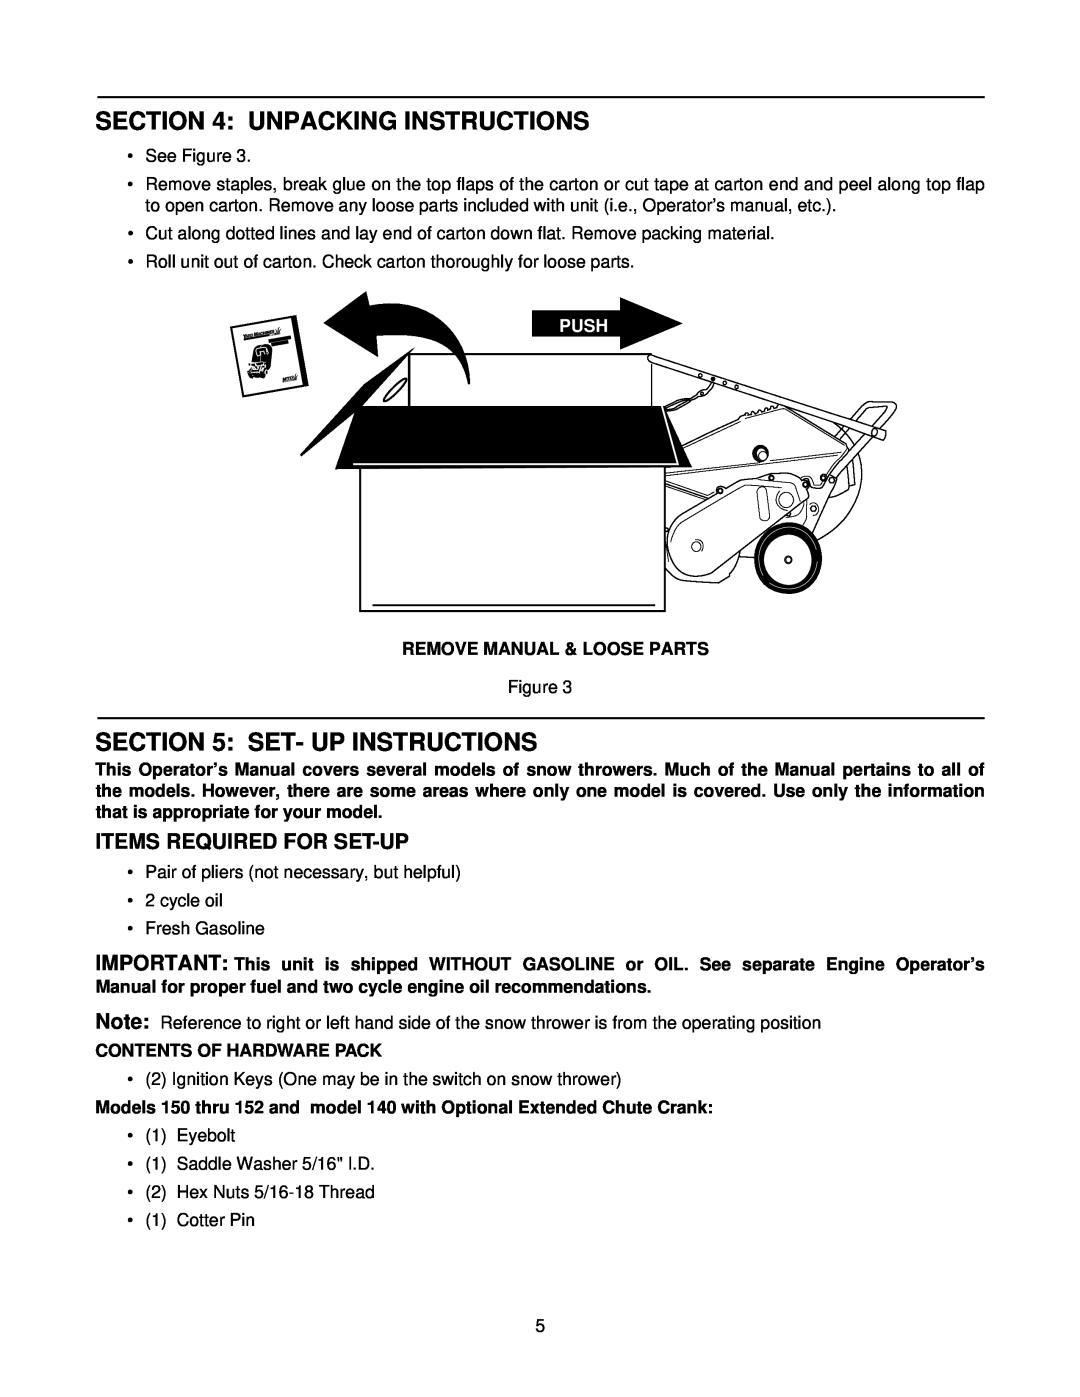 Yard Machines 140, 152 manual Unpacking Instructions, Set- Up Instructions, Items Required For Set-Up, Push 